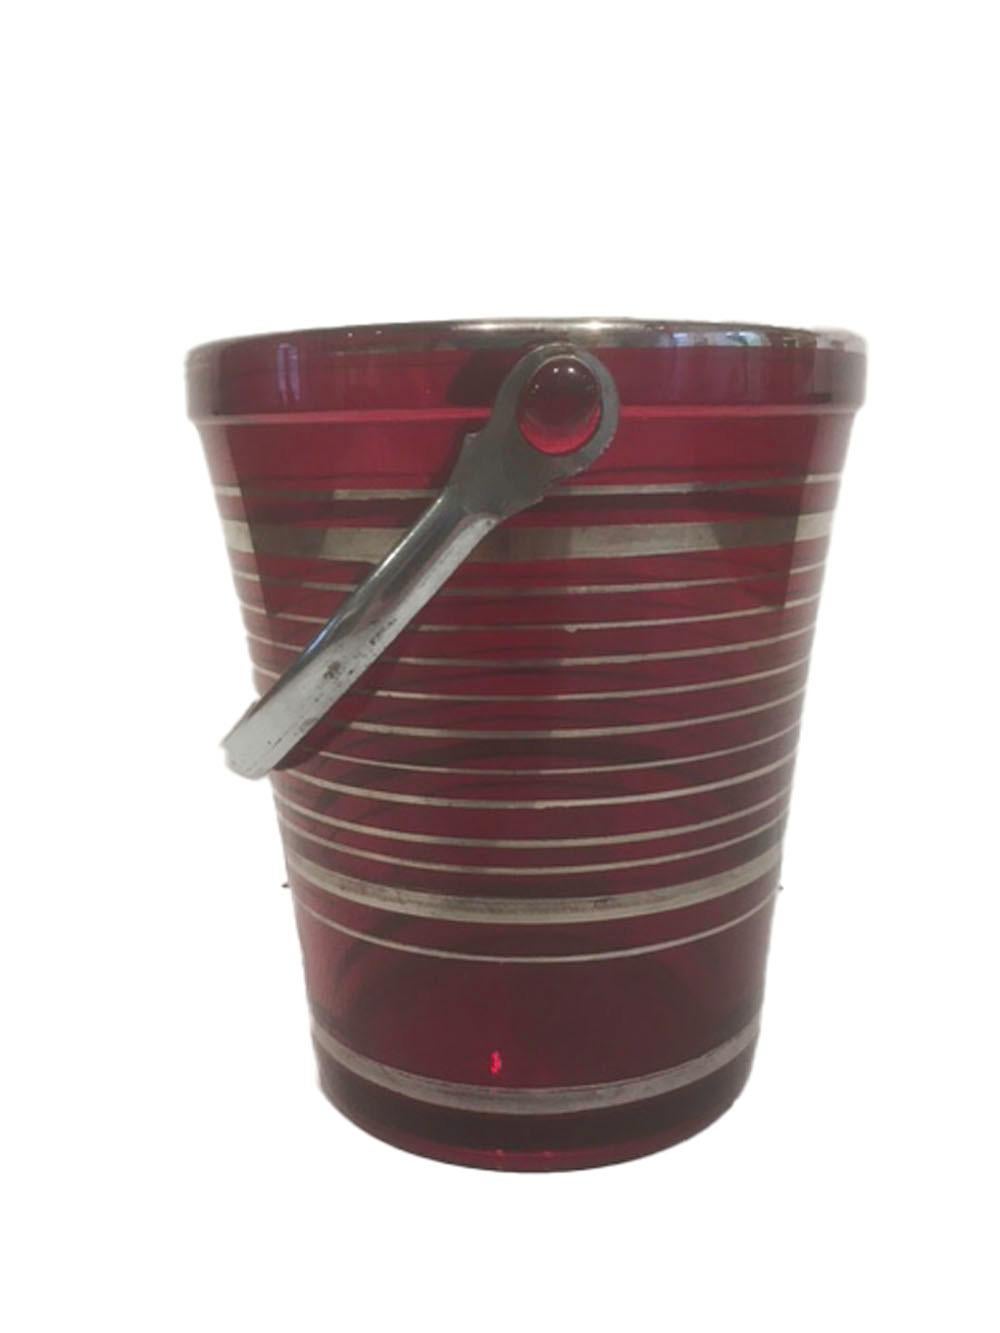 American Art Deco Ruby Red Glass Pail-Form Ice Bucket with Silver Bands & Chromed Handle